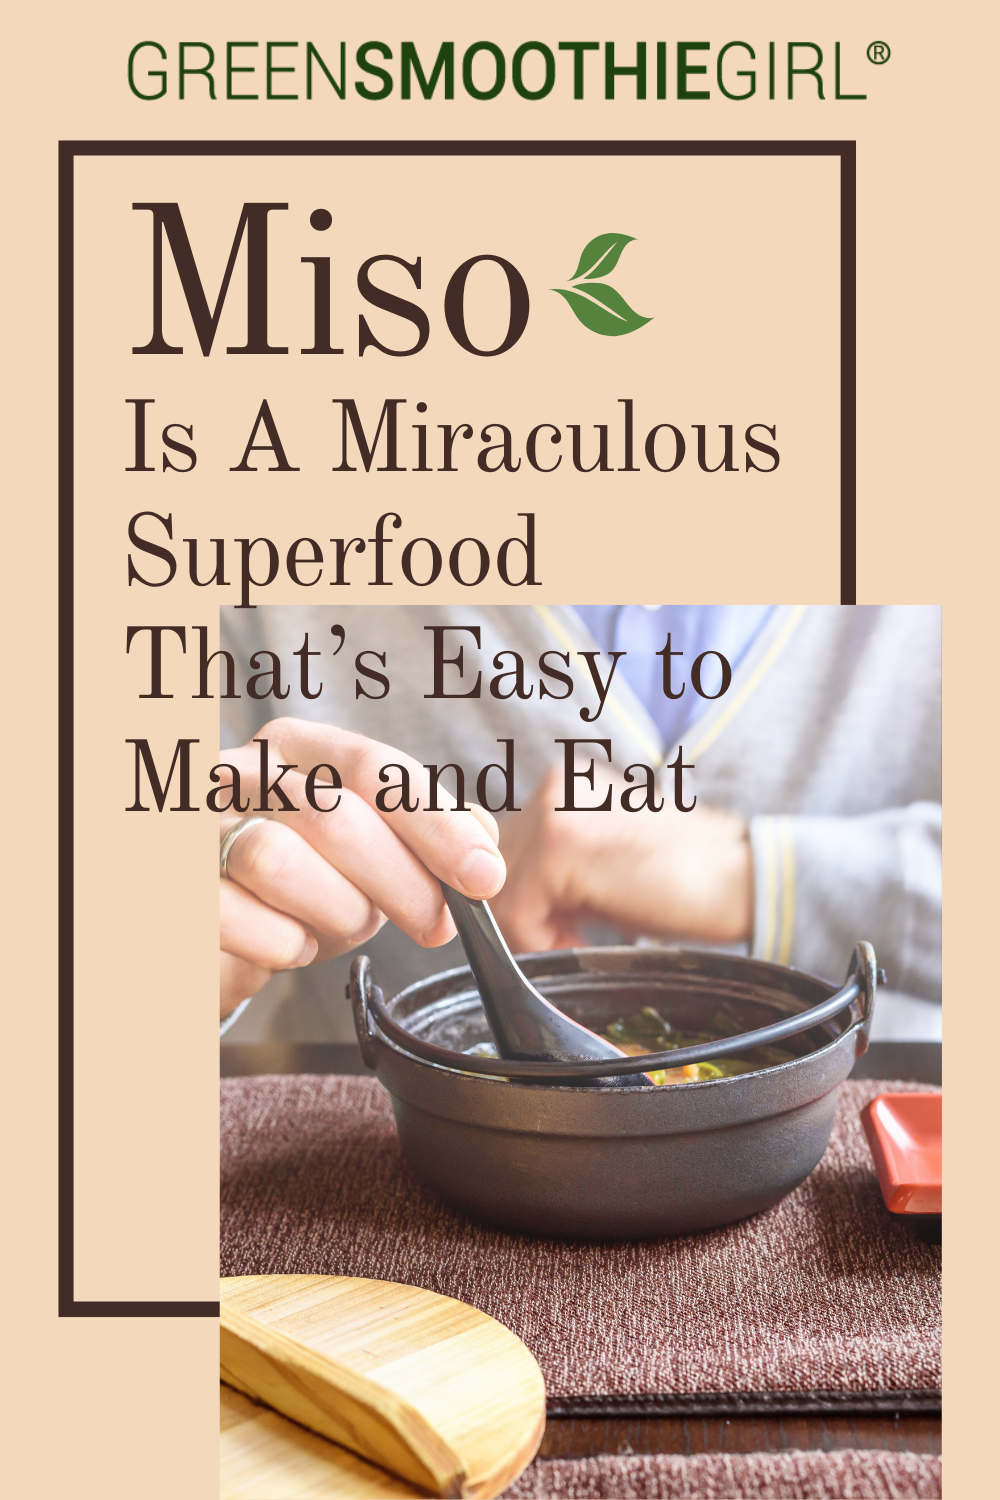 Discover the health benefits of miso